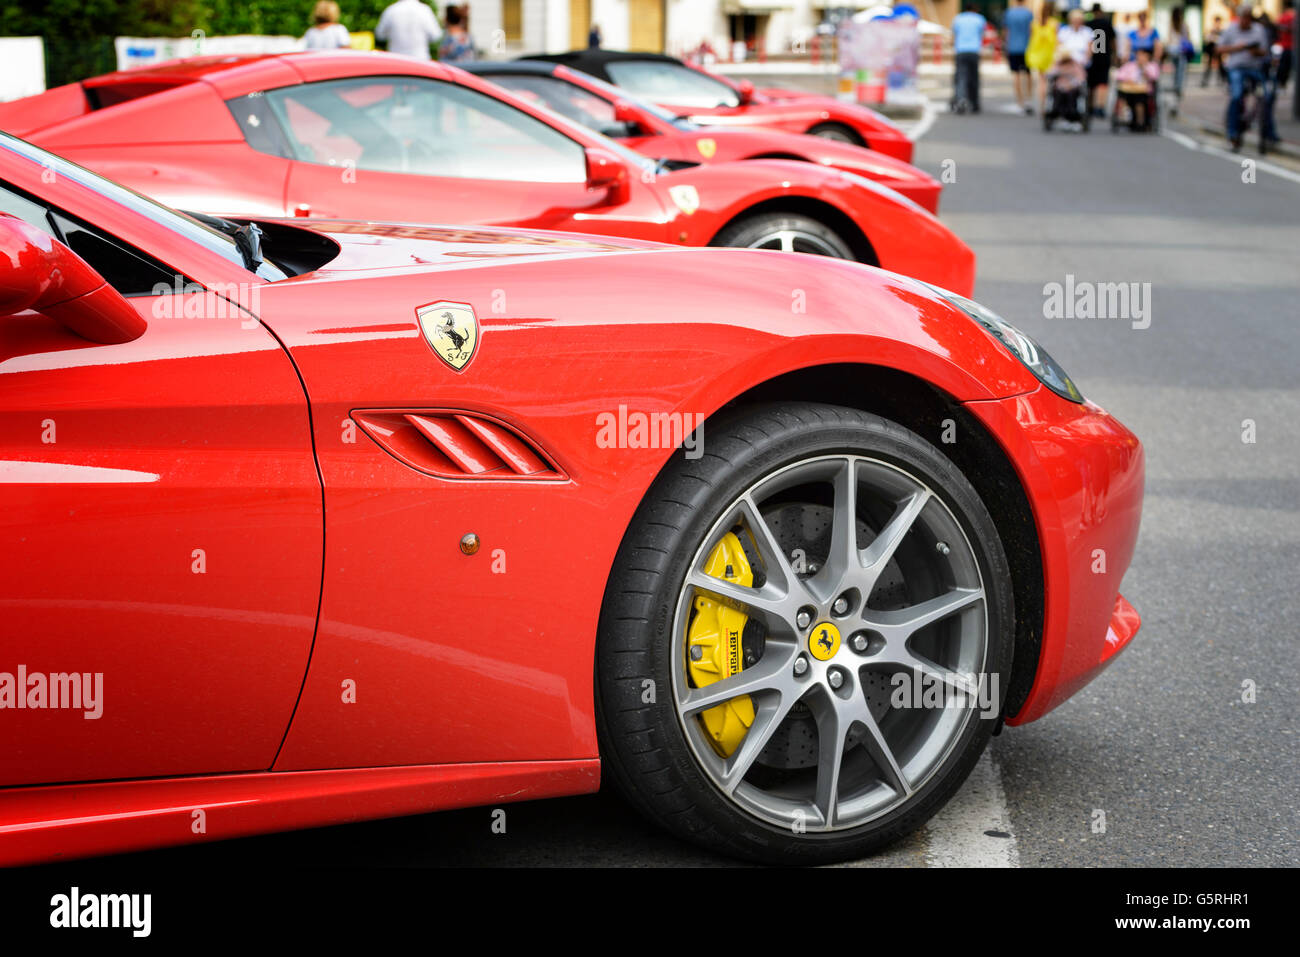 Fifth edition of the Maranello red night with Ferrari car on display in the streets of the country Stock Photo